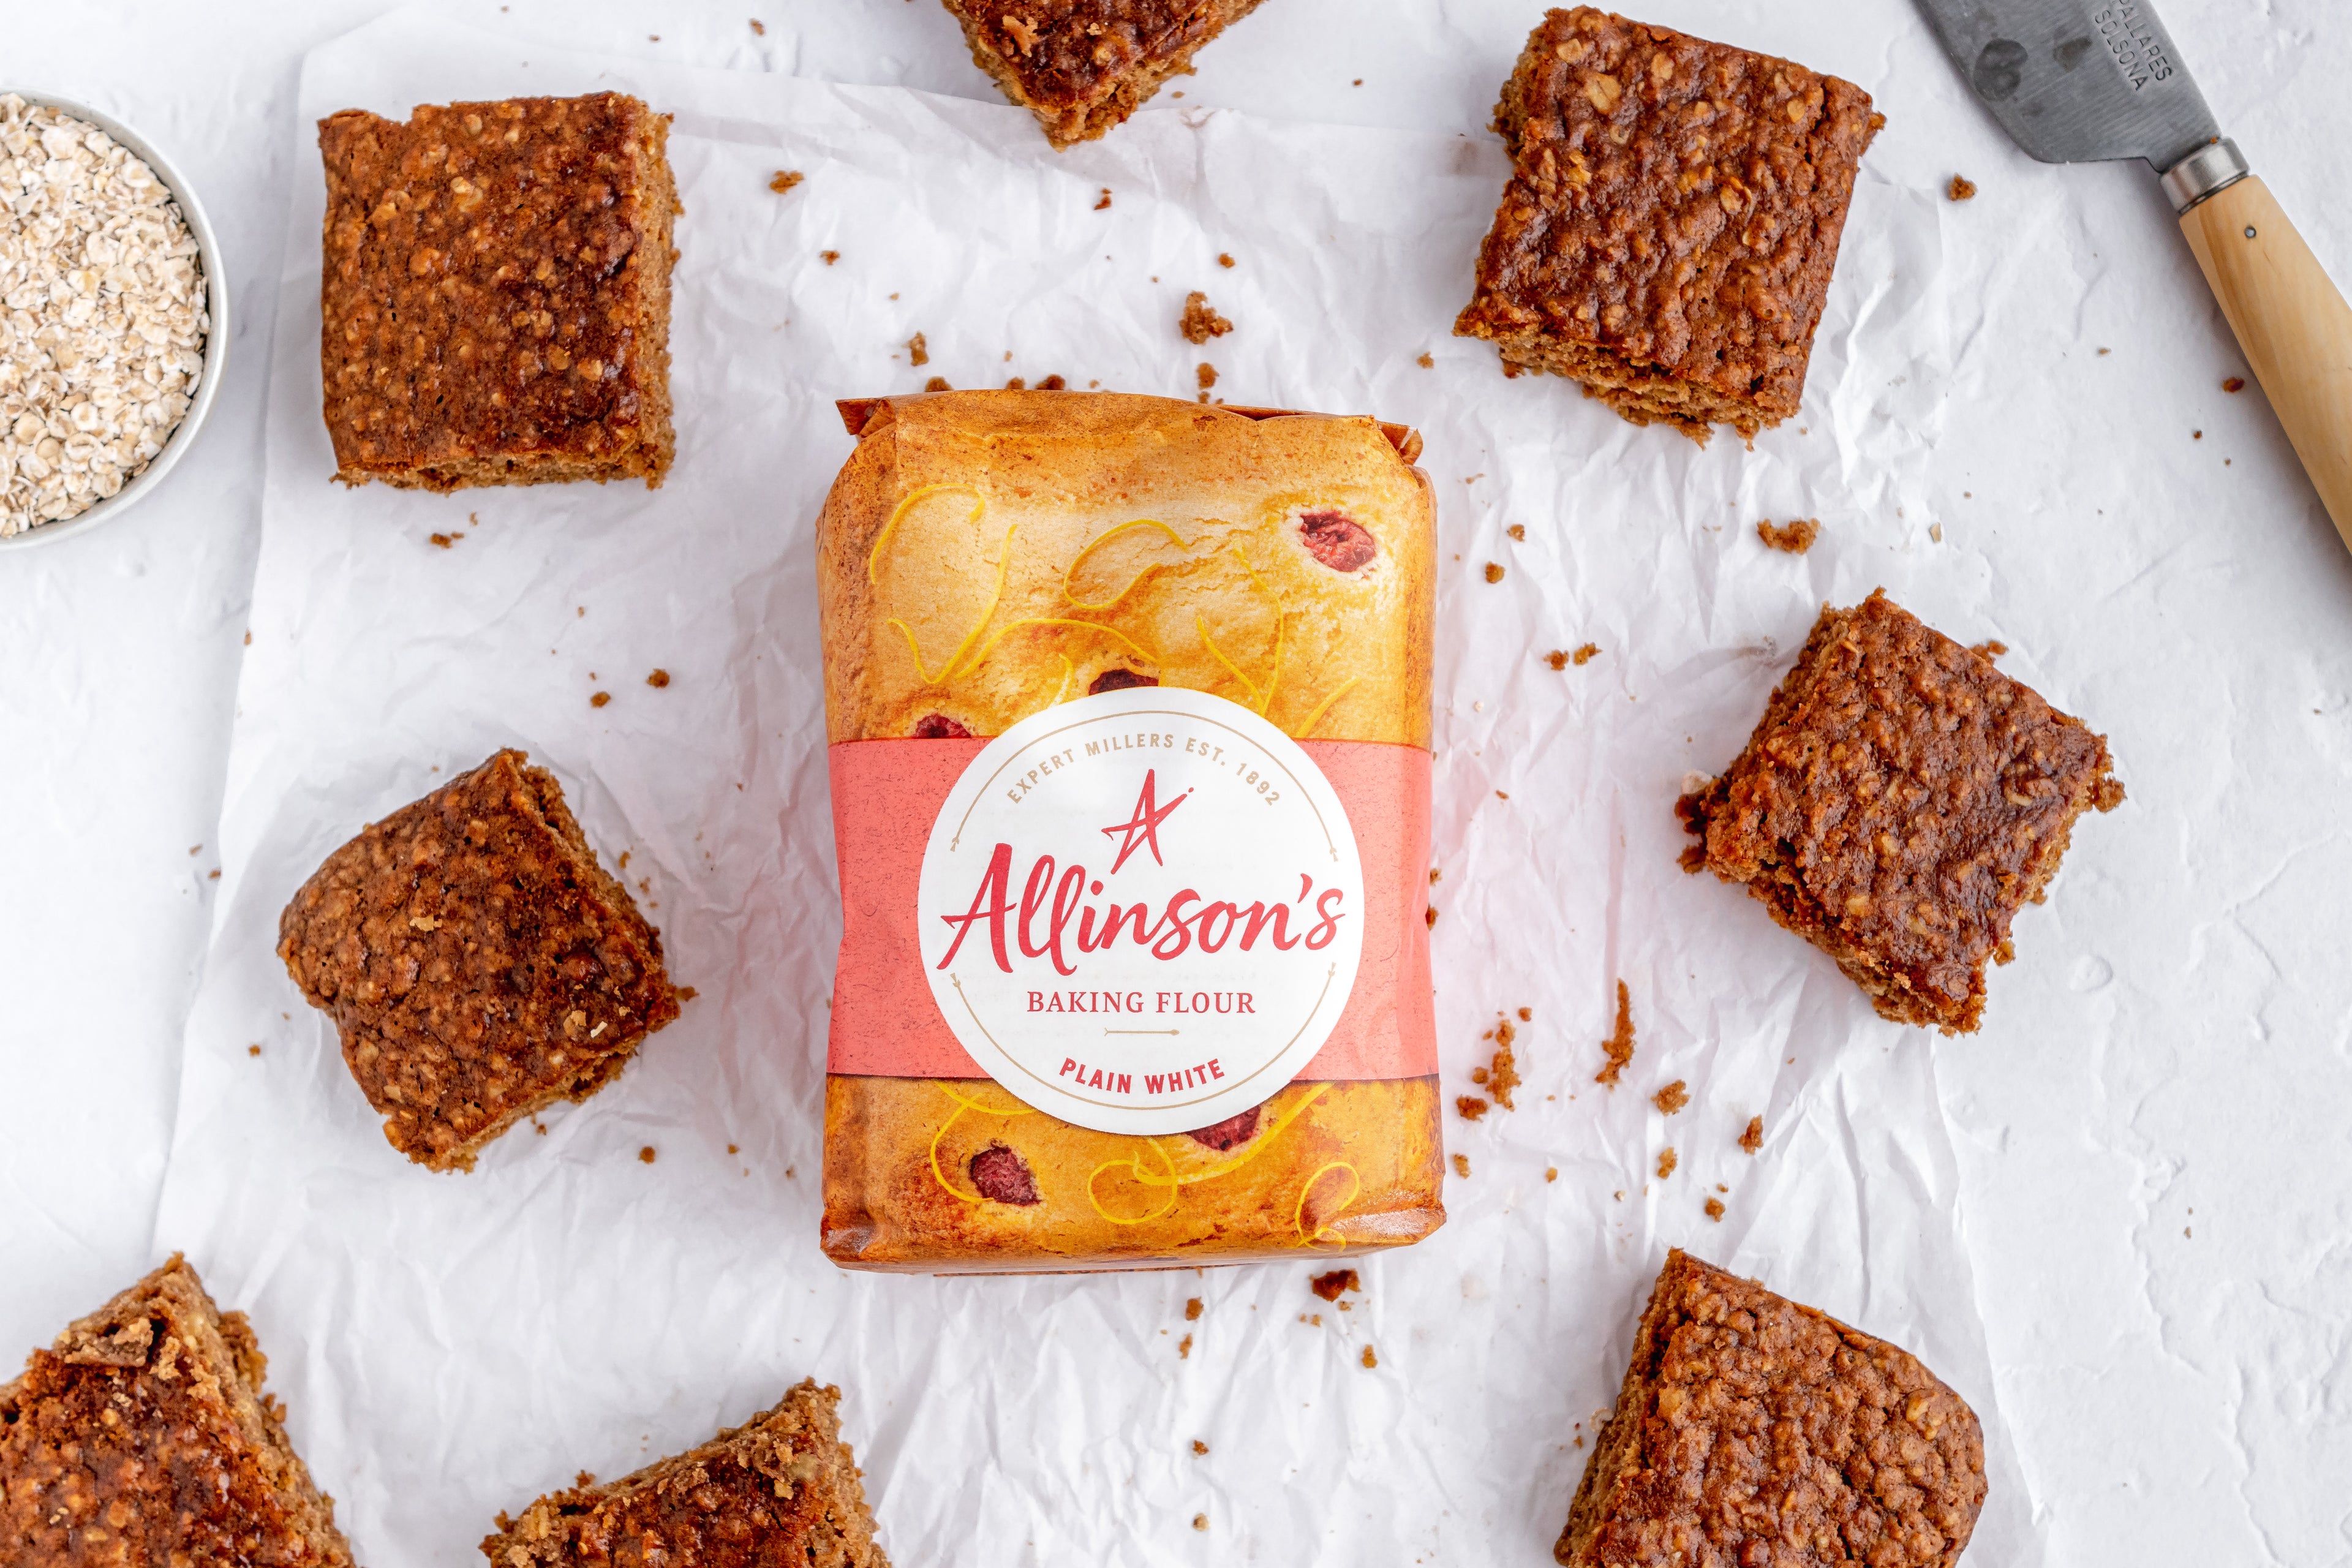 Square slices of Sticky Yorkshire Parkin placed around a bag of Allinson's Plain White Flour on baking paper